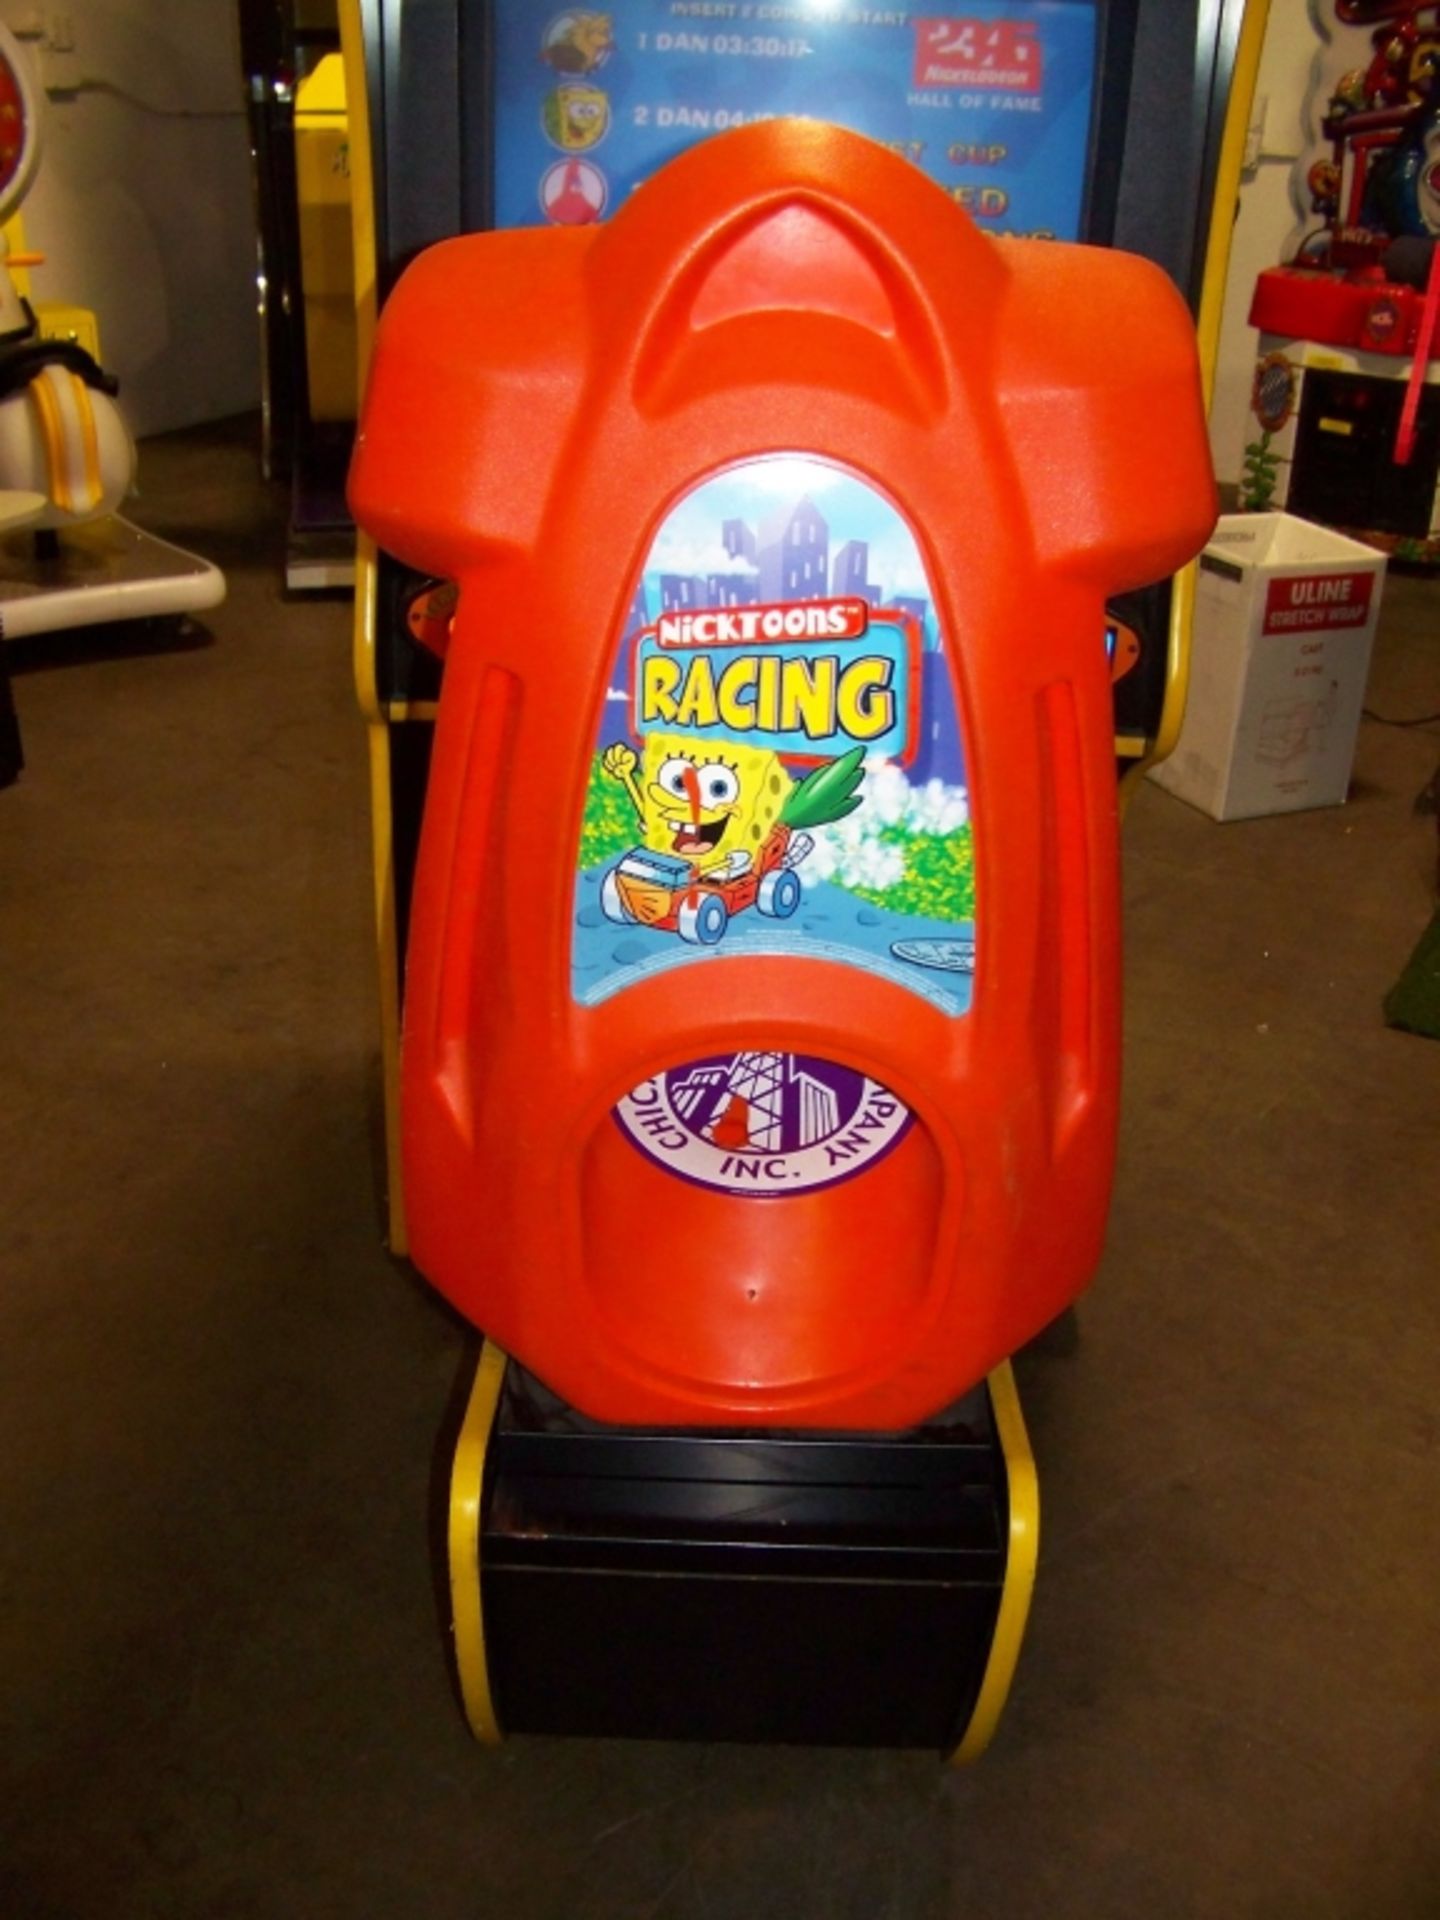 NICKTOONS RACING SITDOWN ARCADE GAME CHICAGO COIN - Image 4 of 6